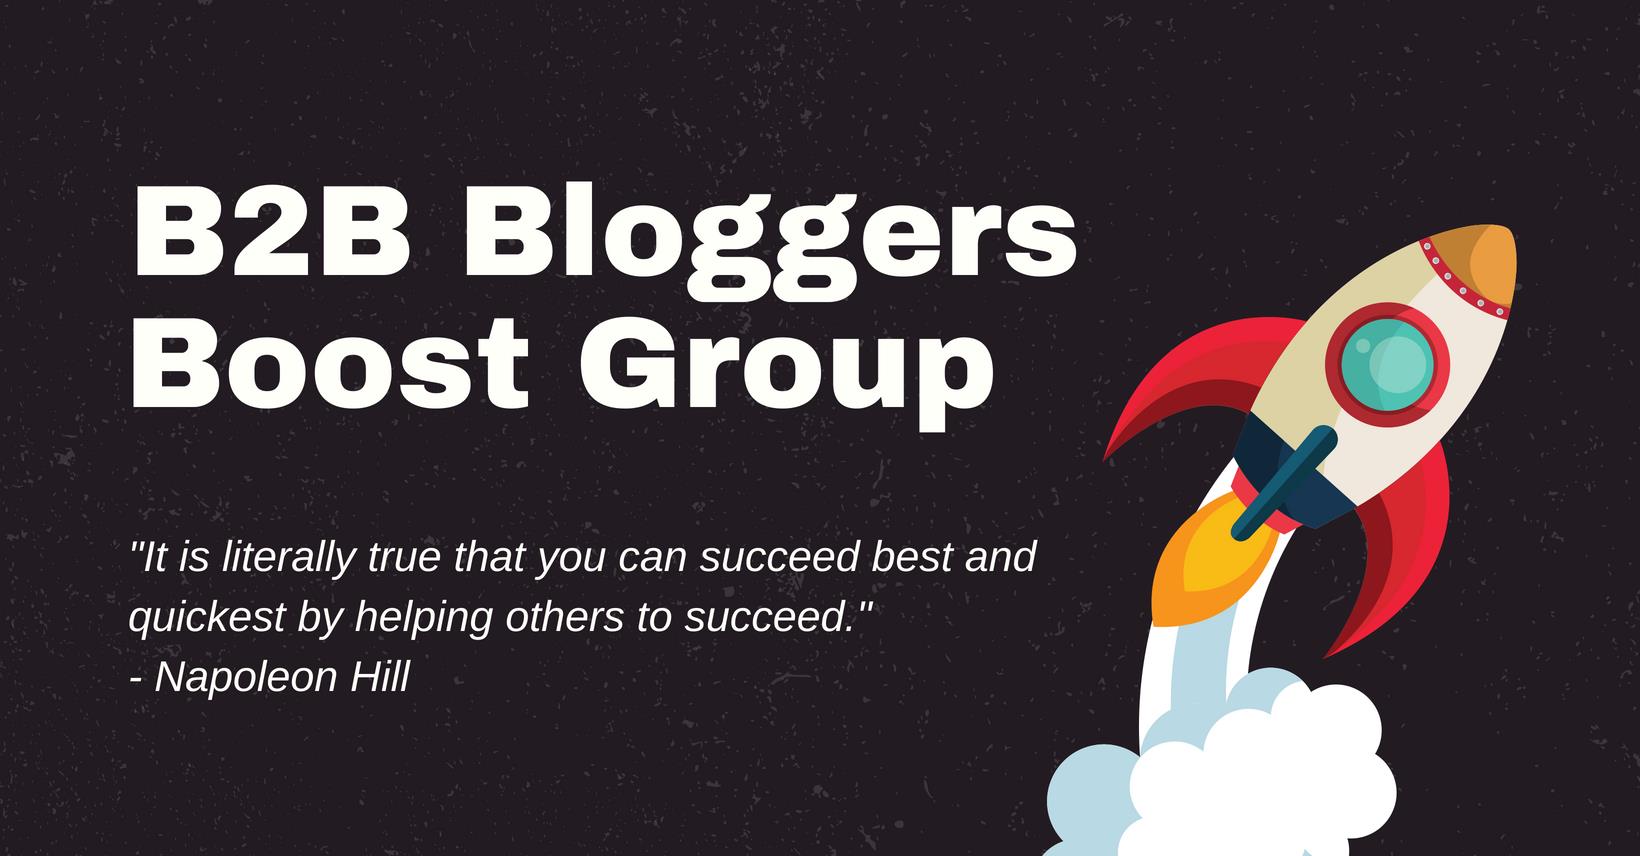 This image includes a screenshot of the front page of the B2B Bloggers Boost Group on Facebook.